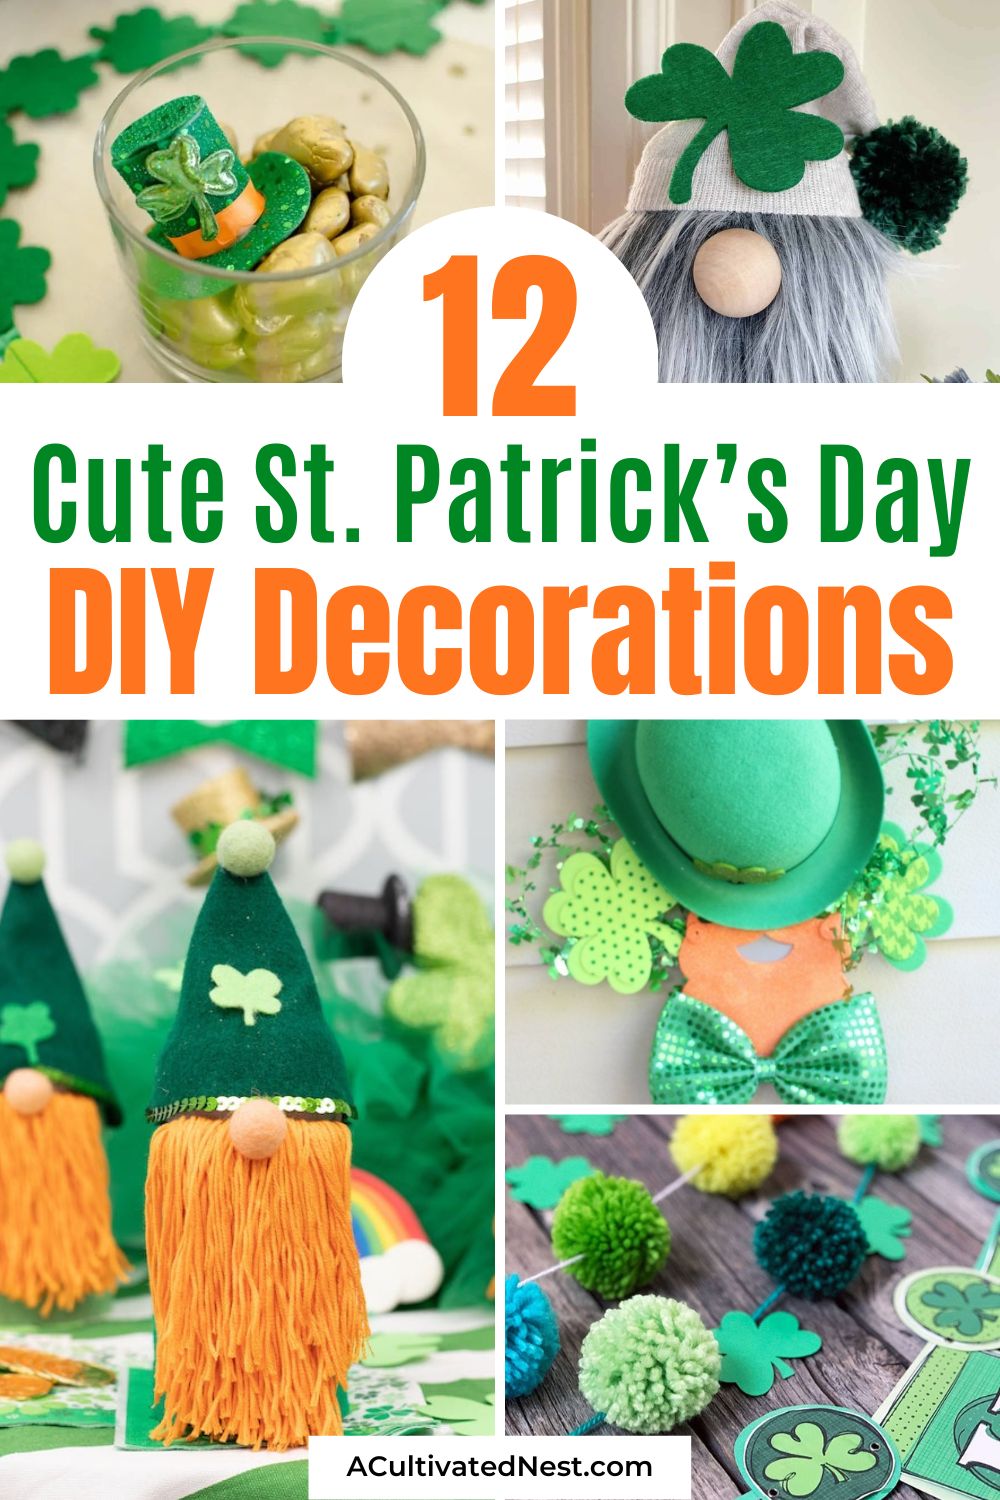 12 Cute DIY St. Patrick's Day Decorations- Bring the luck of the Irish into your home with these charming DIY St. Patrick's Day decorations! From pots of gold to shamrocks, these ideas will make your celebration extra special. | #SaintPatricksDay #StPattysDay #craftIdeas #DIY #ACultivatedNest